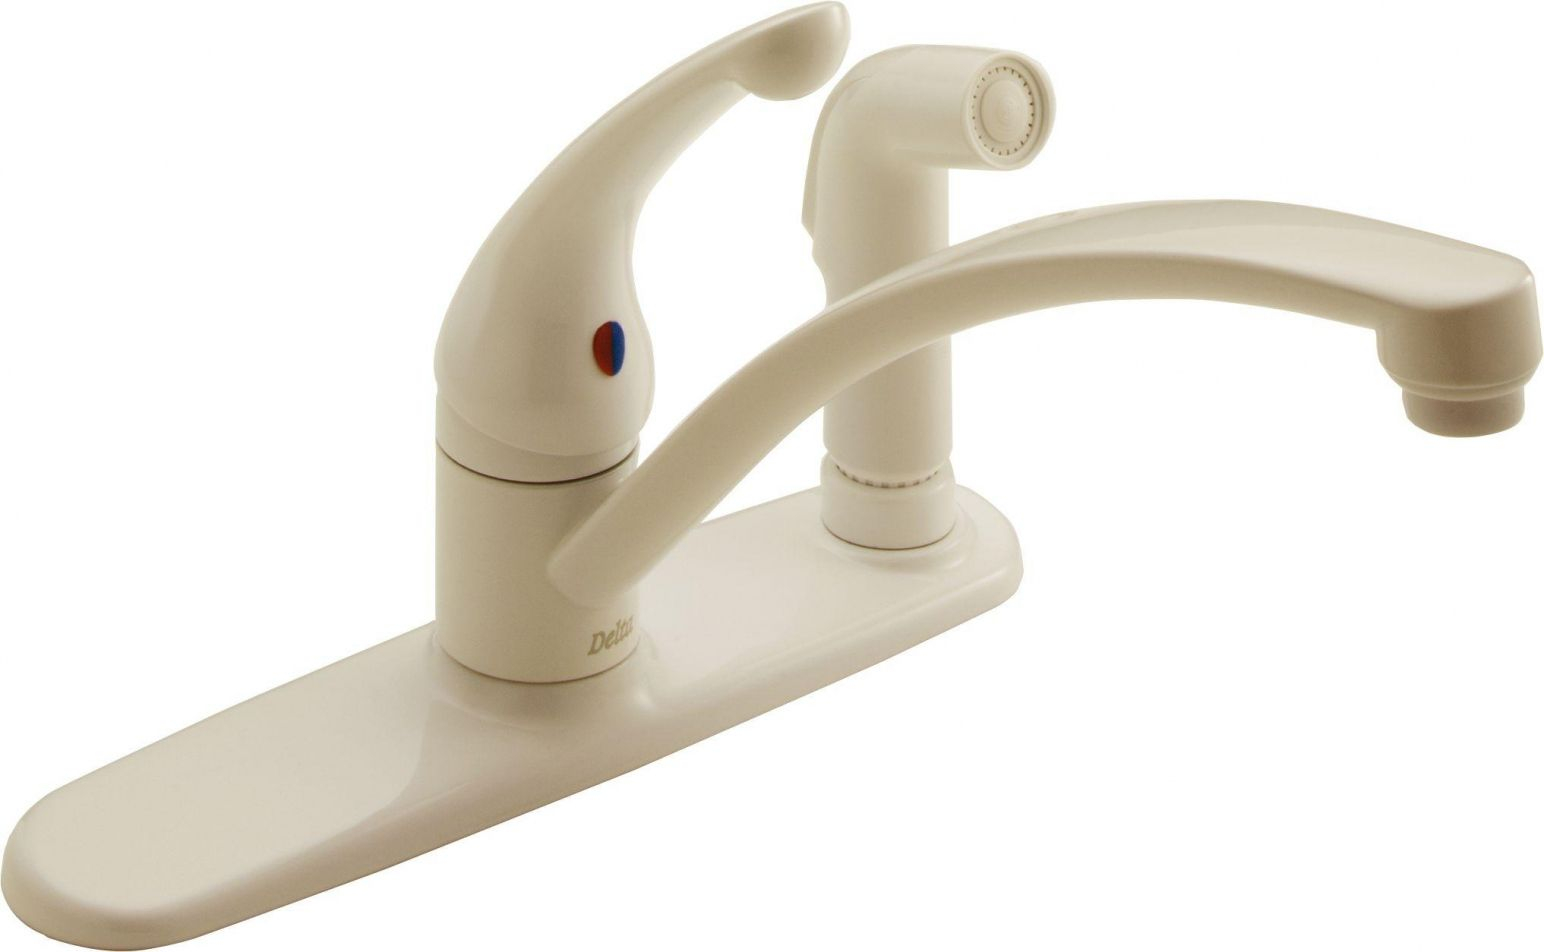 ivory colored kitchen sink faucet